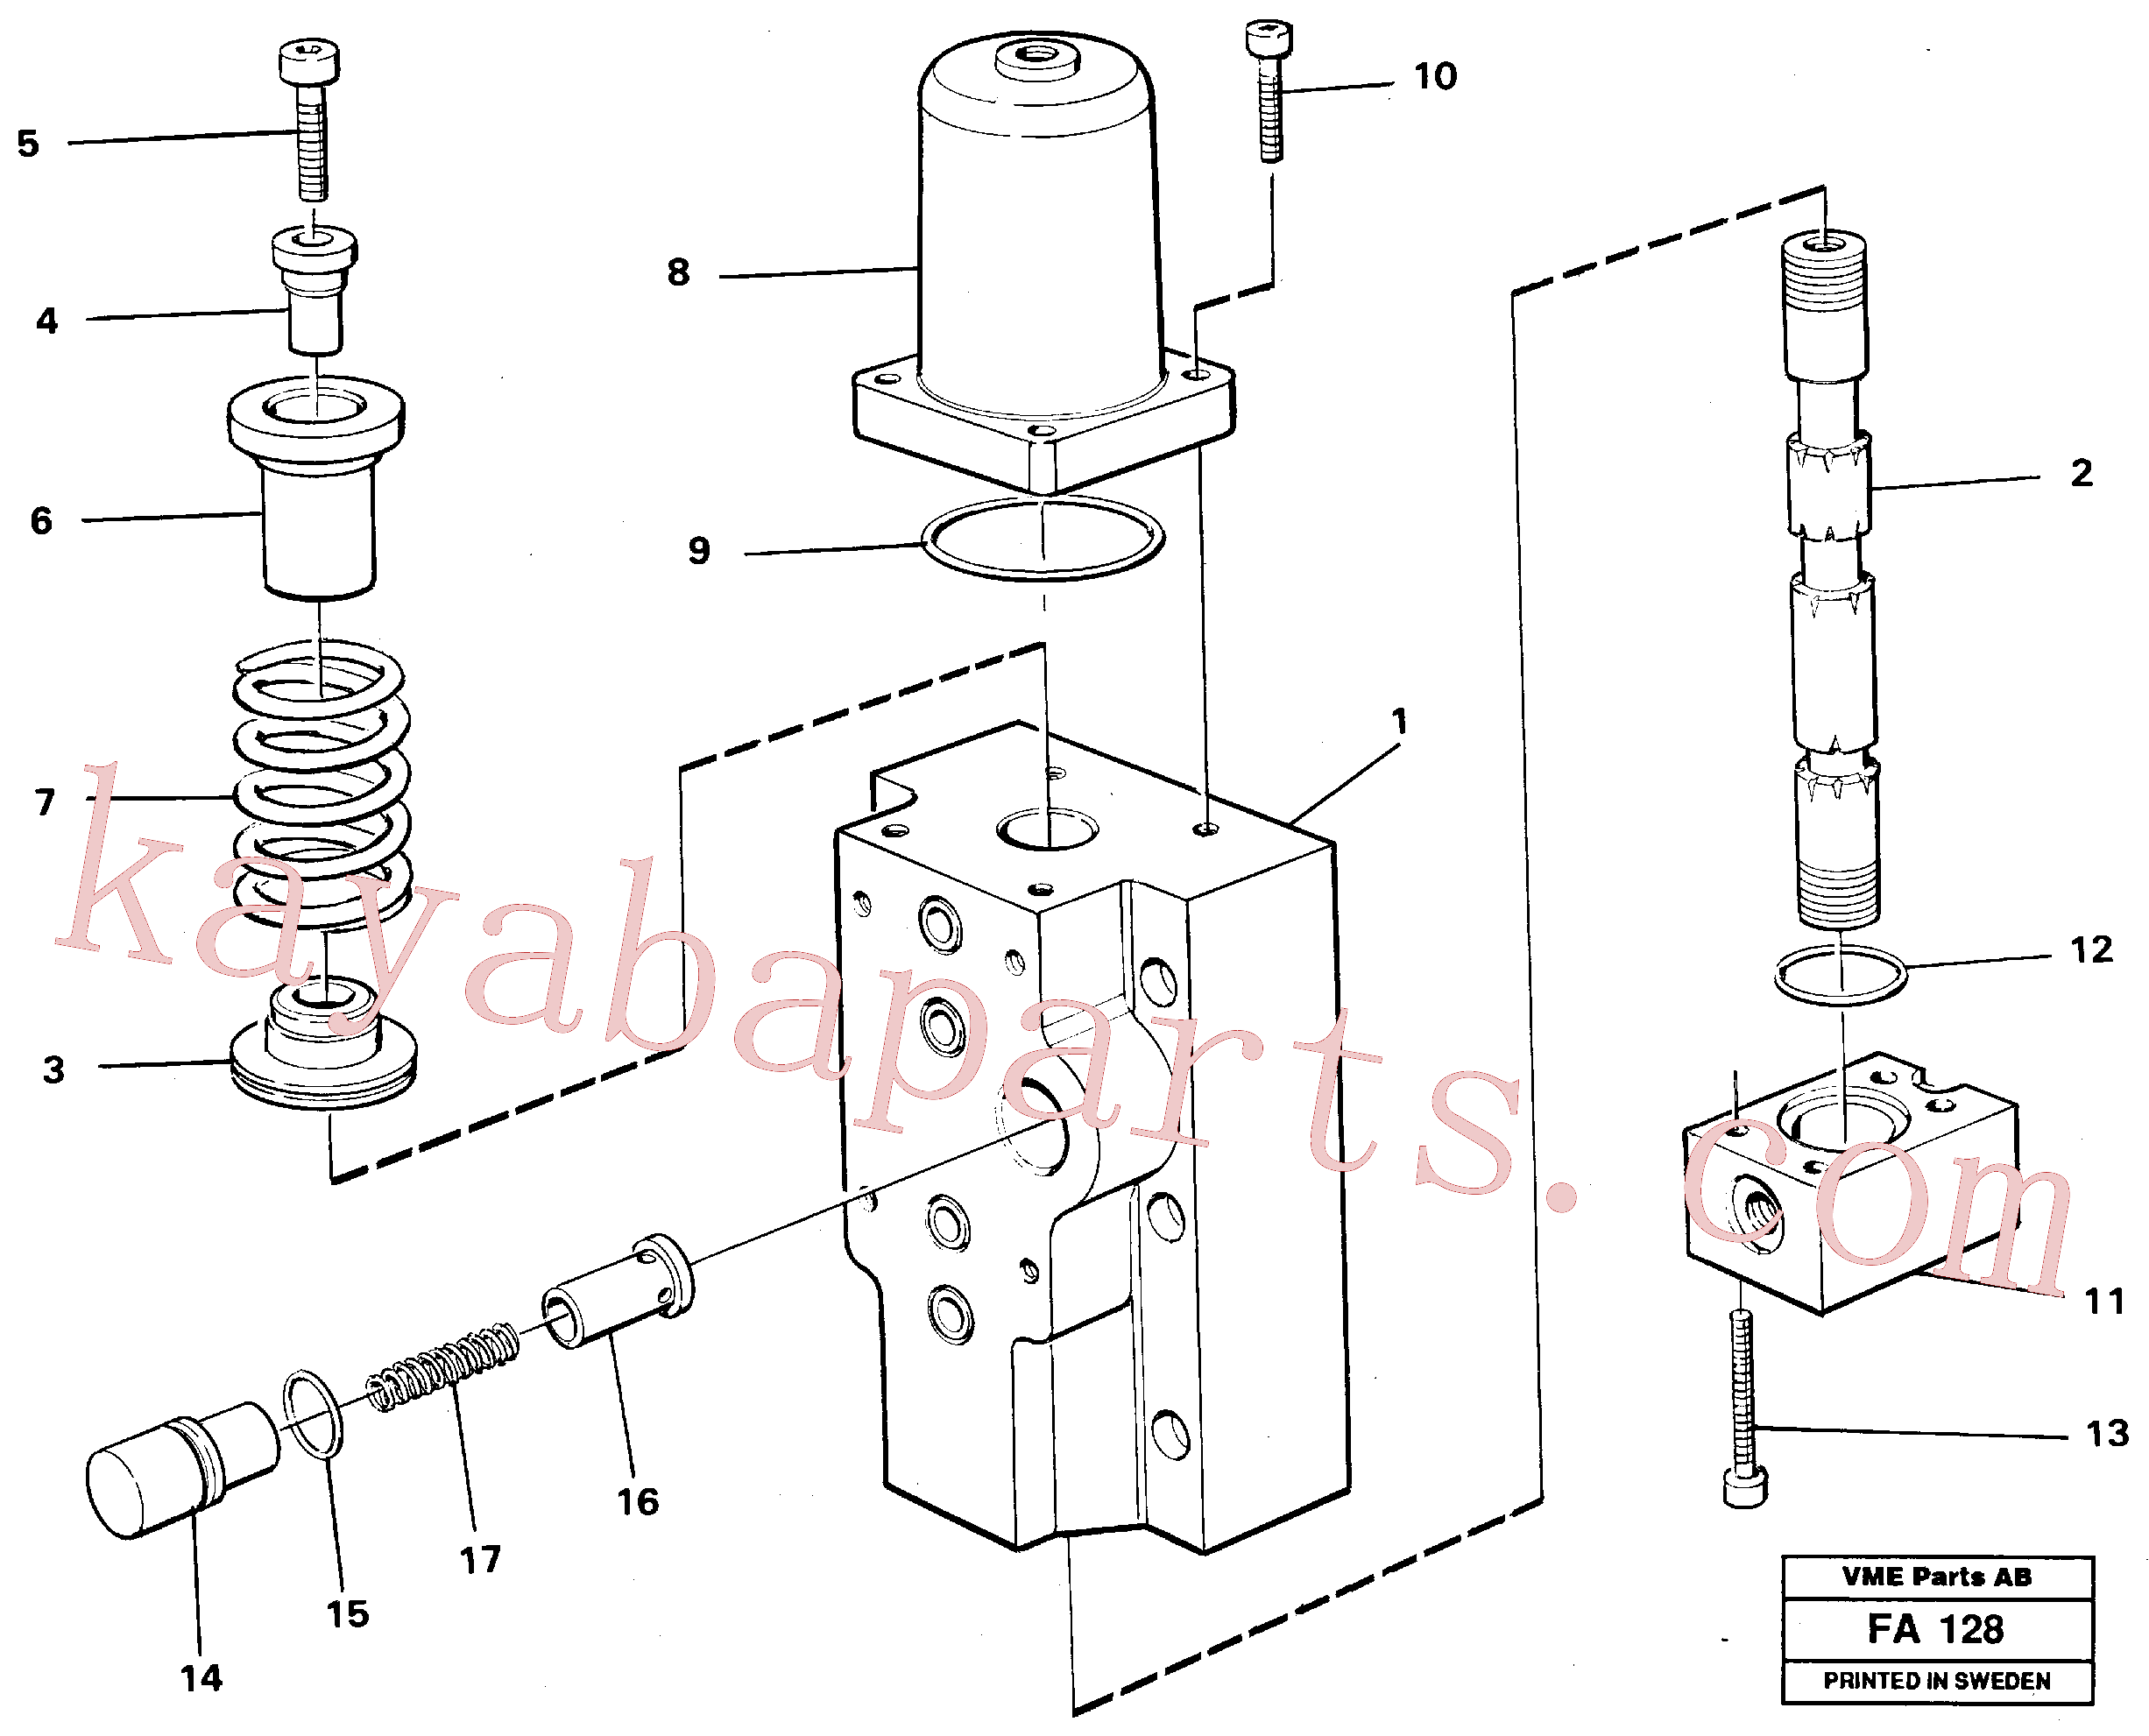 VOE14258011 for Volvo Four-way valve for hammer/shears, Four-way valves Primary(FA128 assembly)